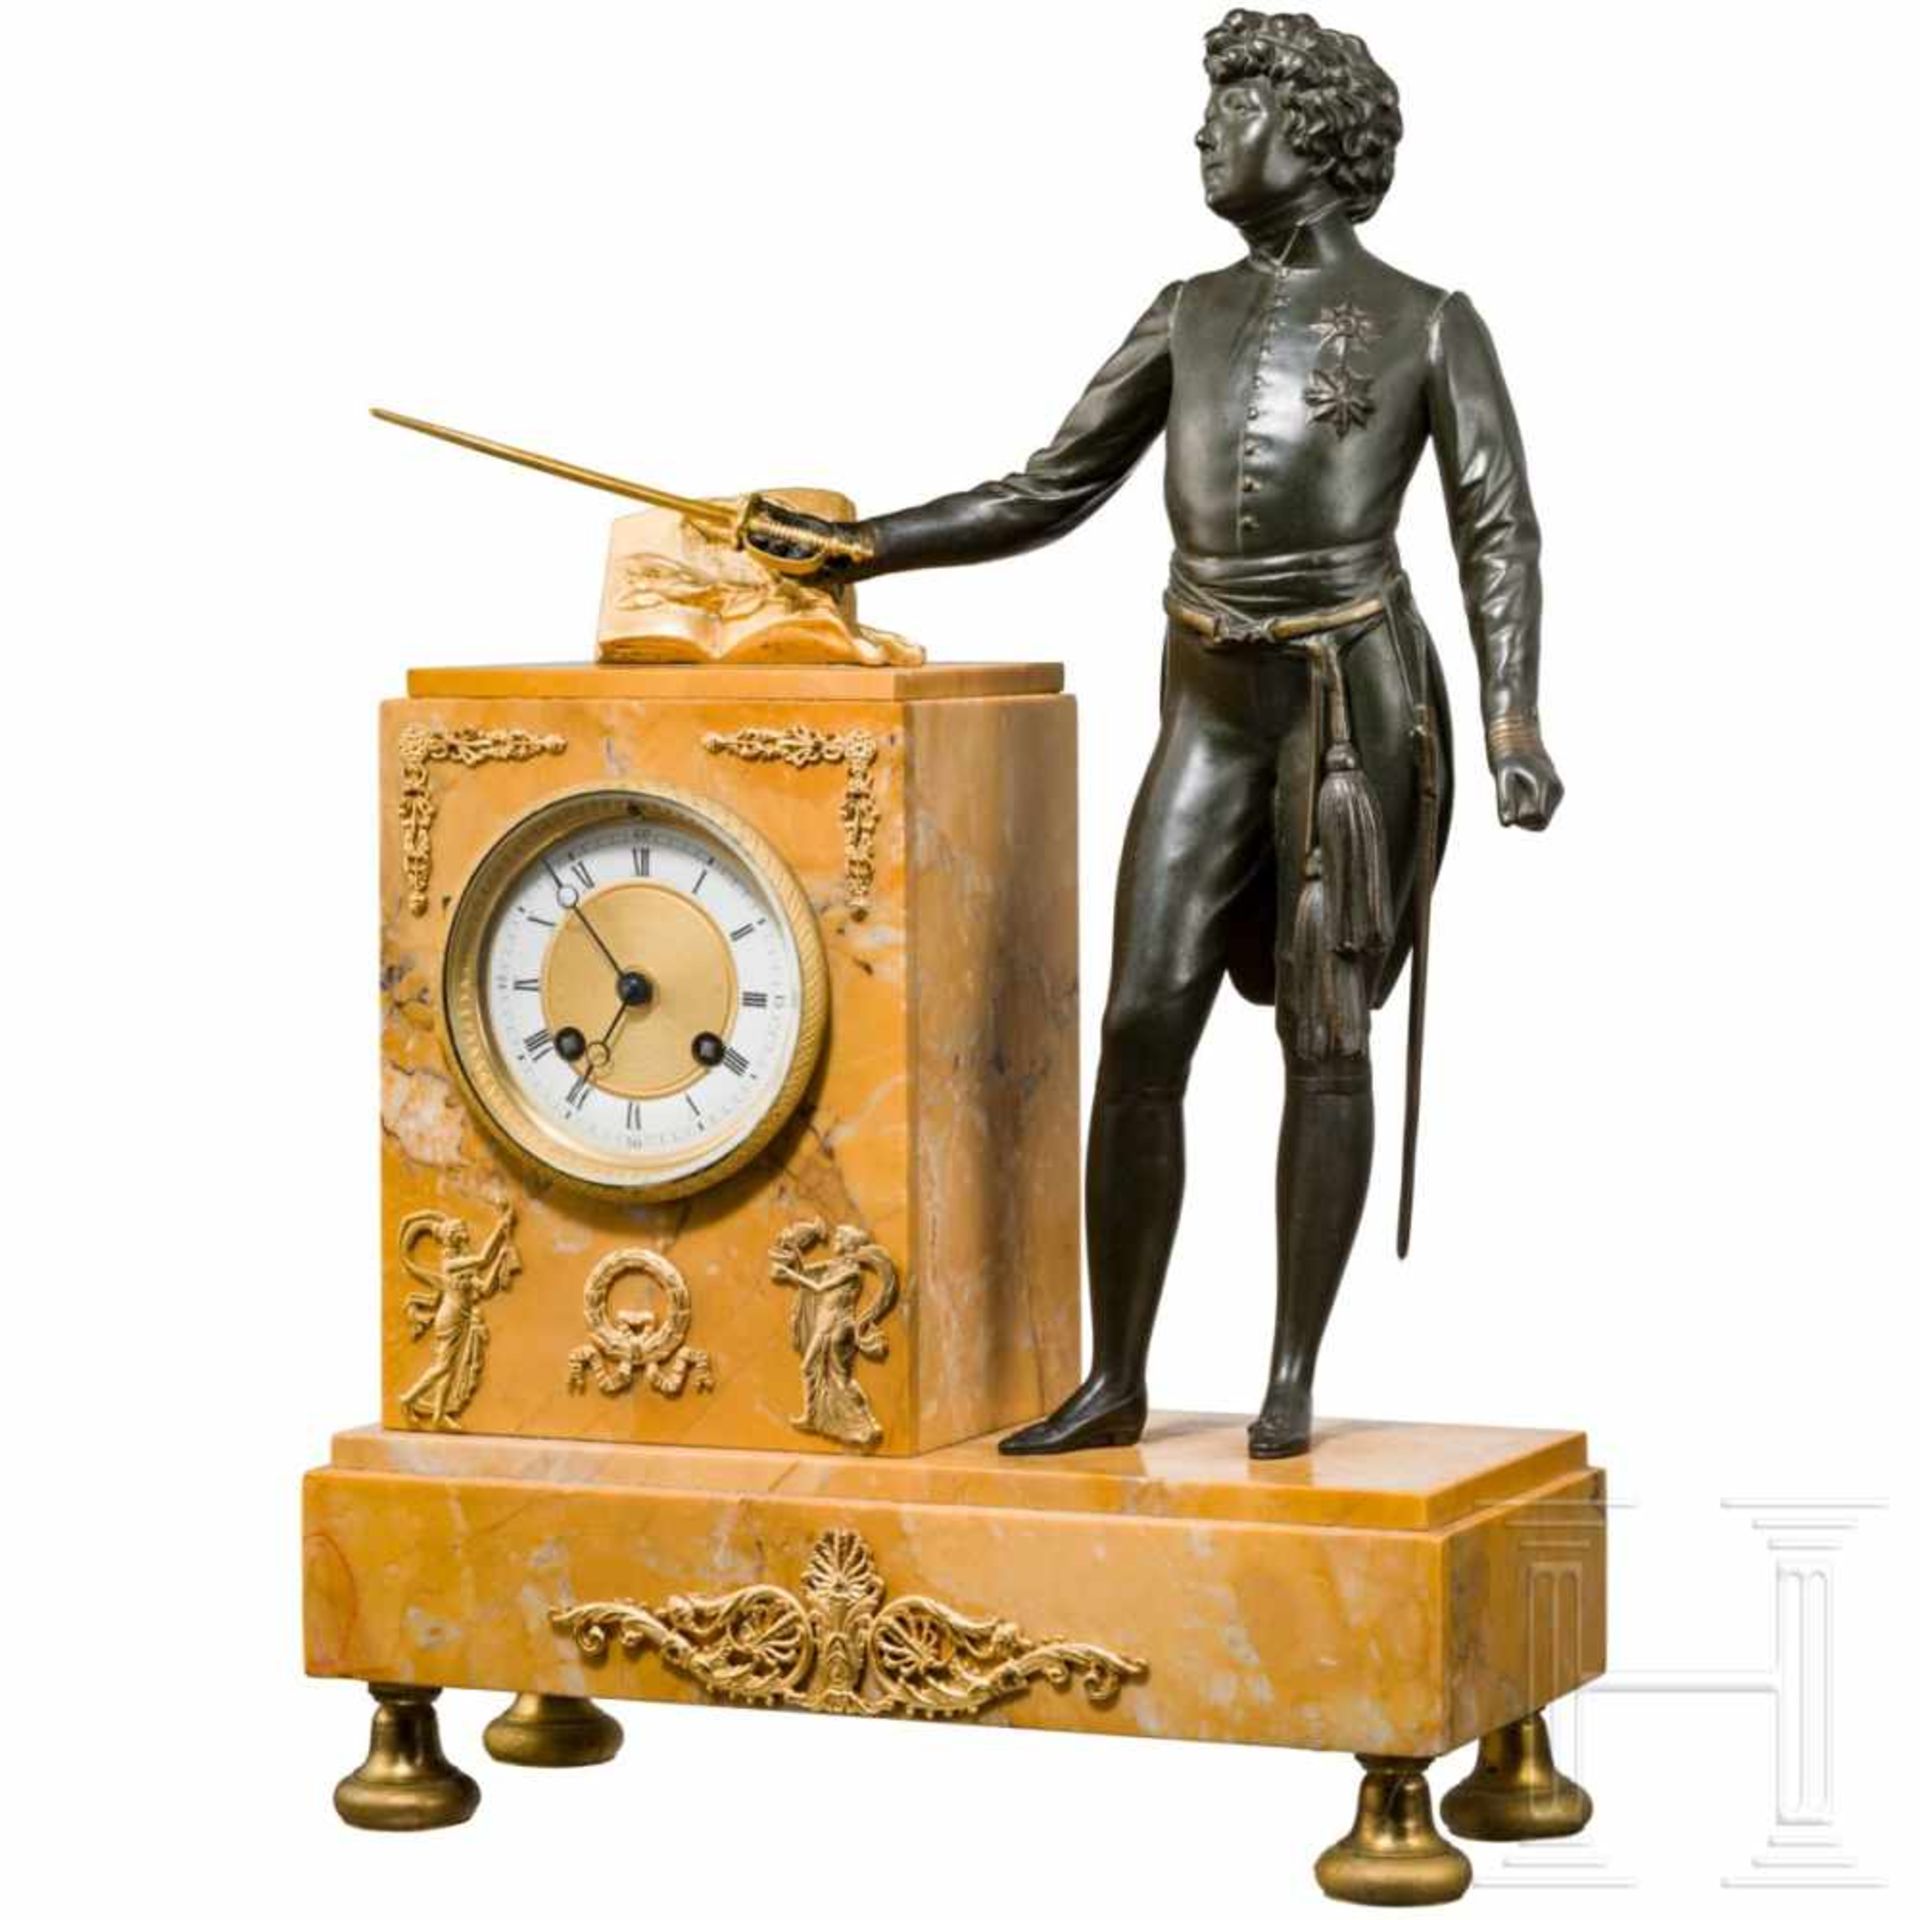 A late-classicistic table clock with a uniform figure, 1840 - 1860Emailliertes Zifferblatt mit